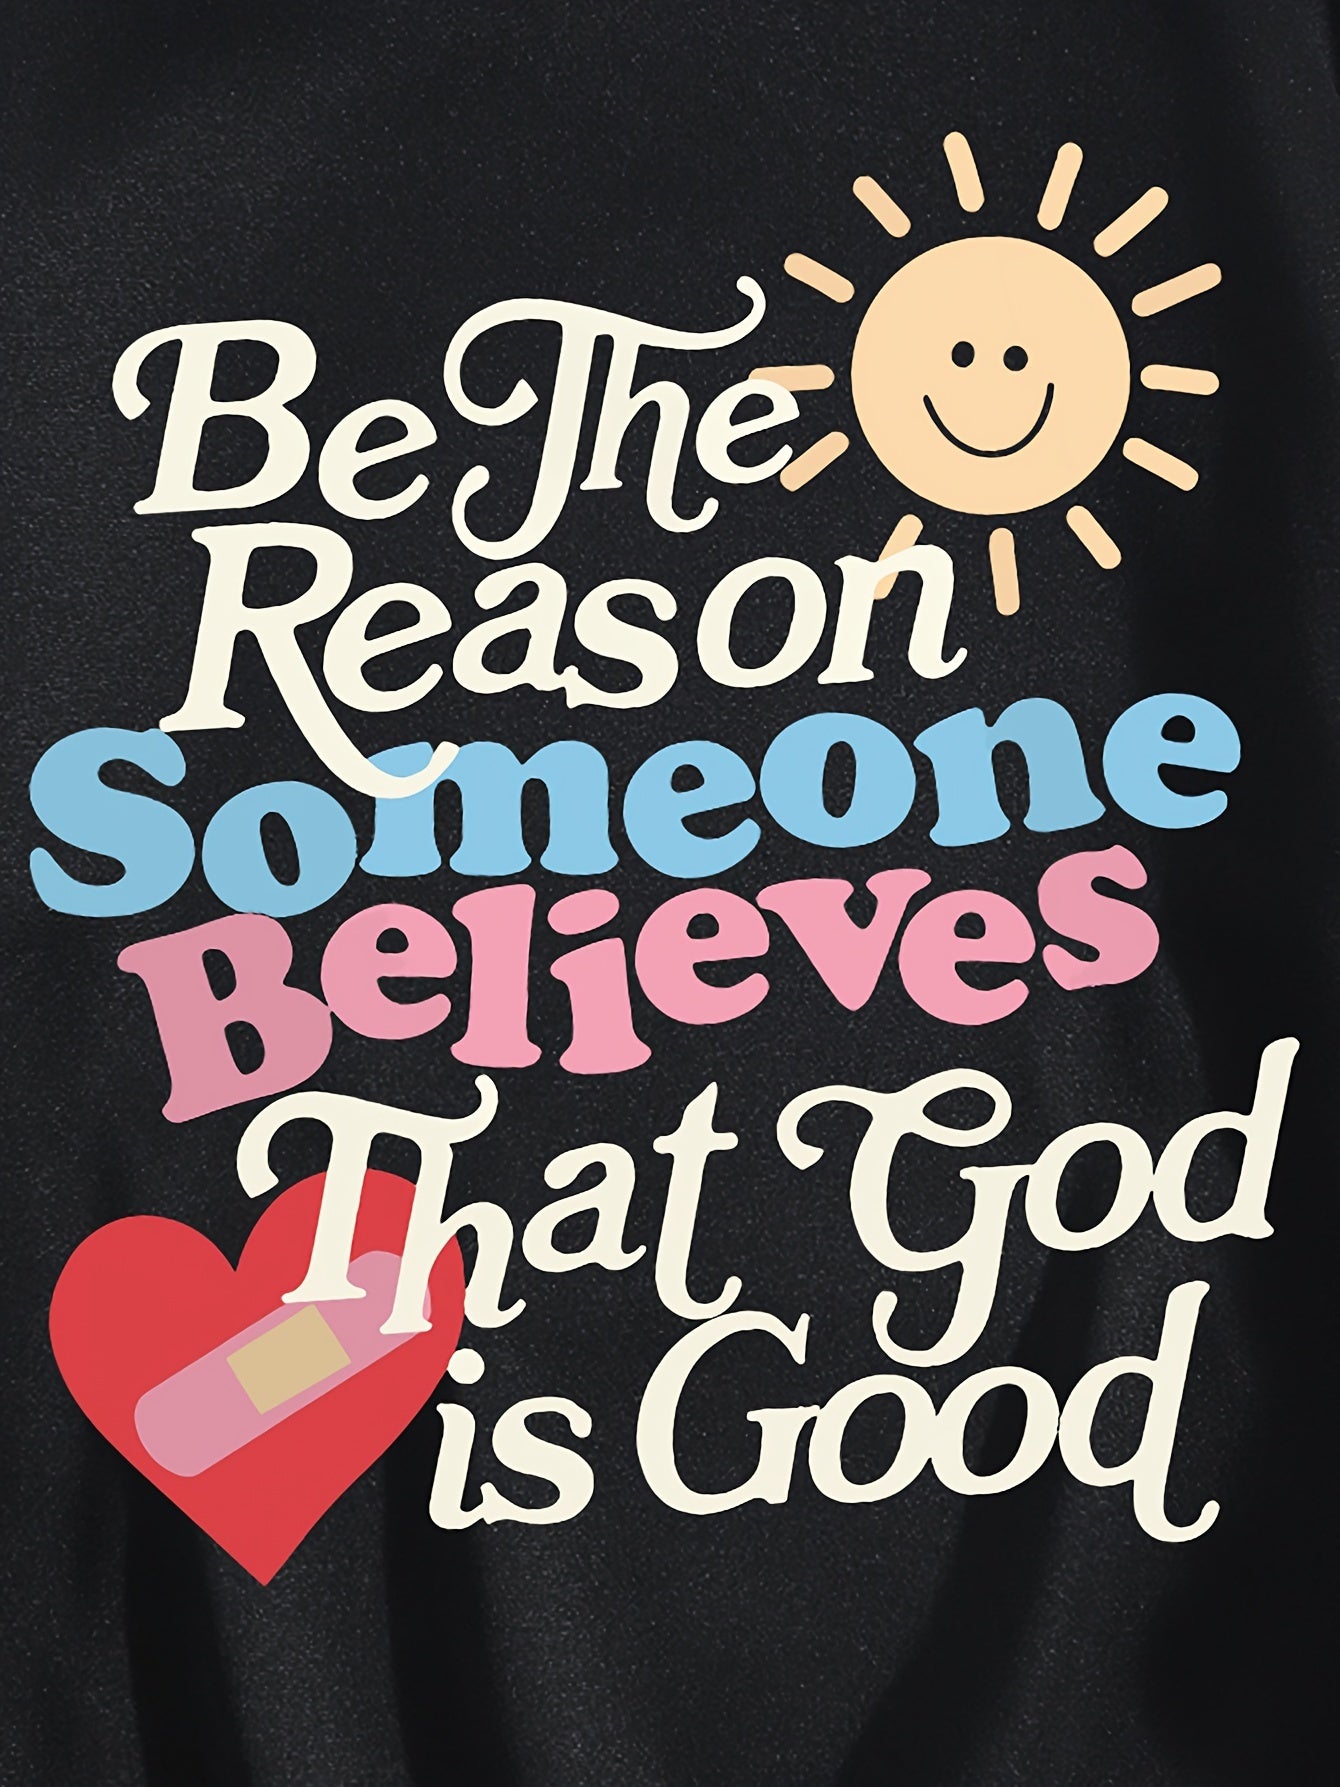 Be The Reason Someone Believes That God Is God Plus Size Women's Christian Pullover Hooded Sweatshirt claimedbygoddesigns